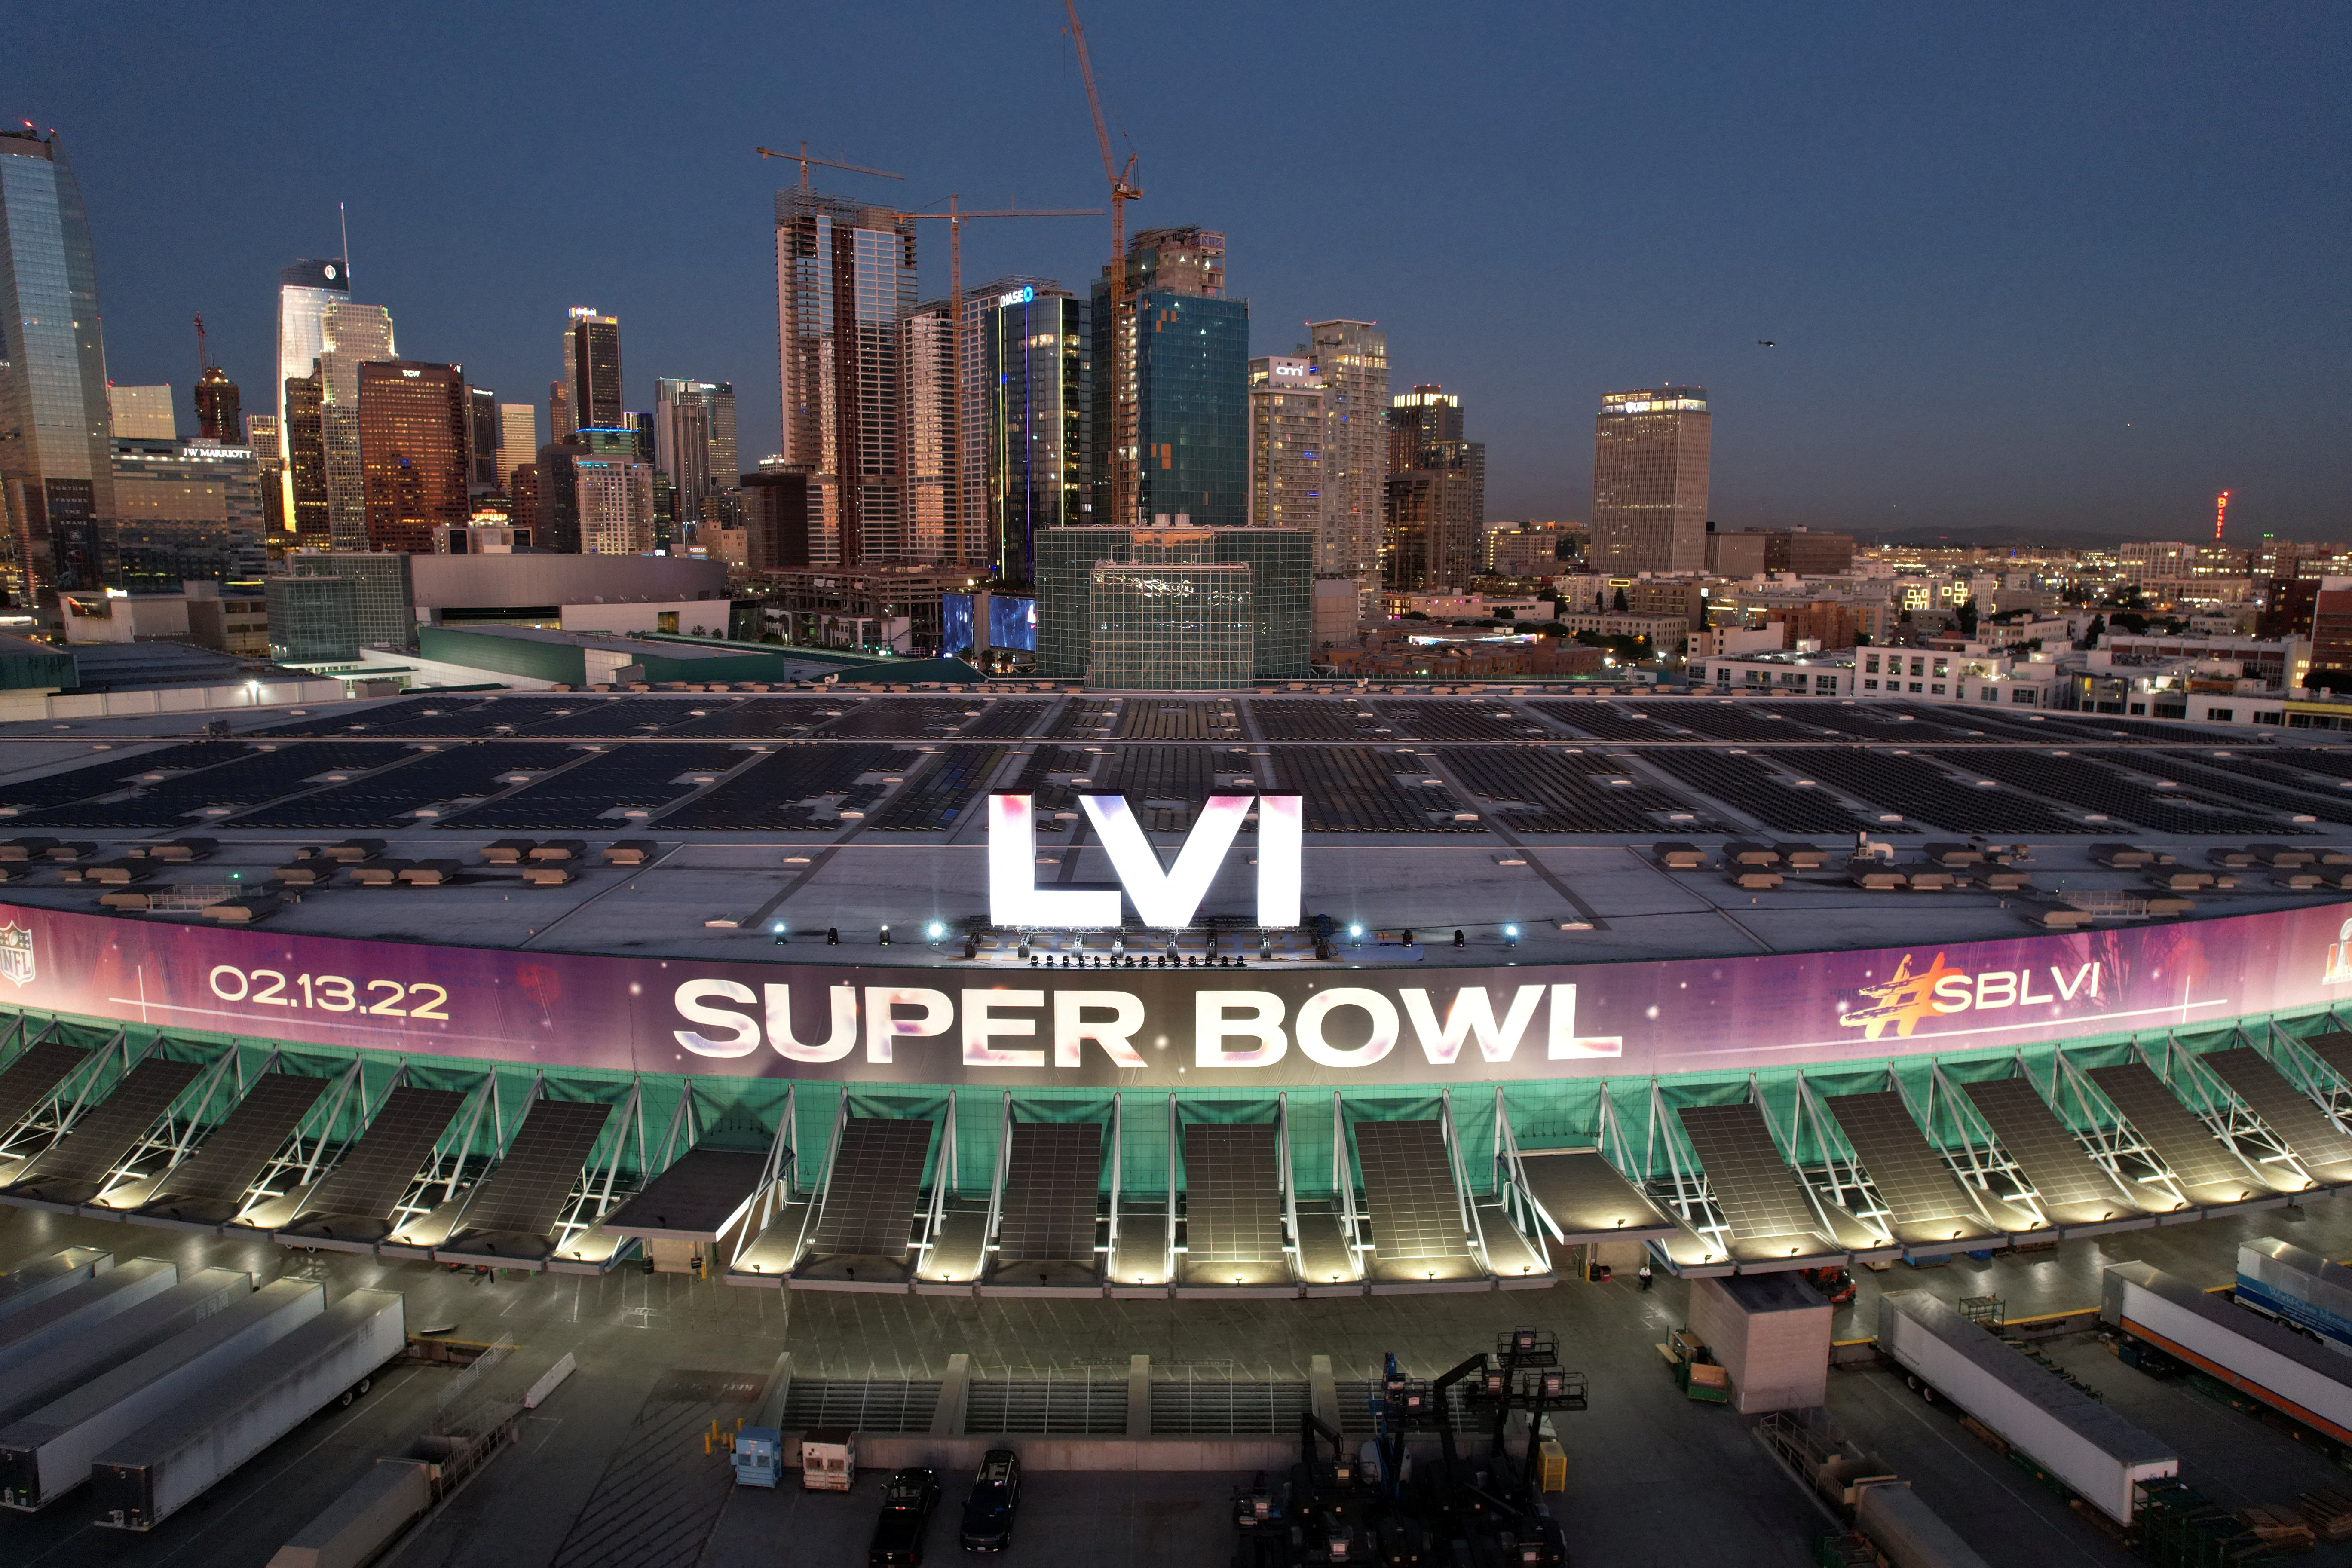 Super Bowl ads are moving on from pandemic with humor and hope